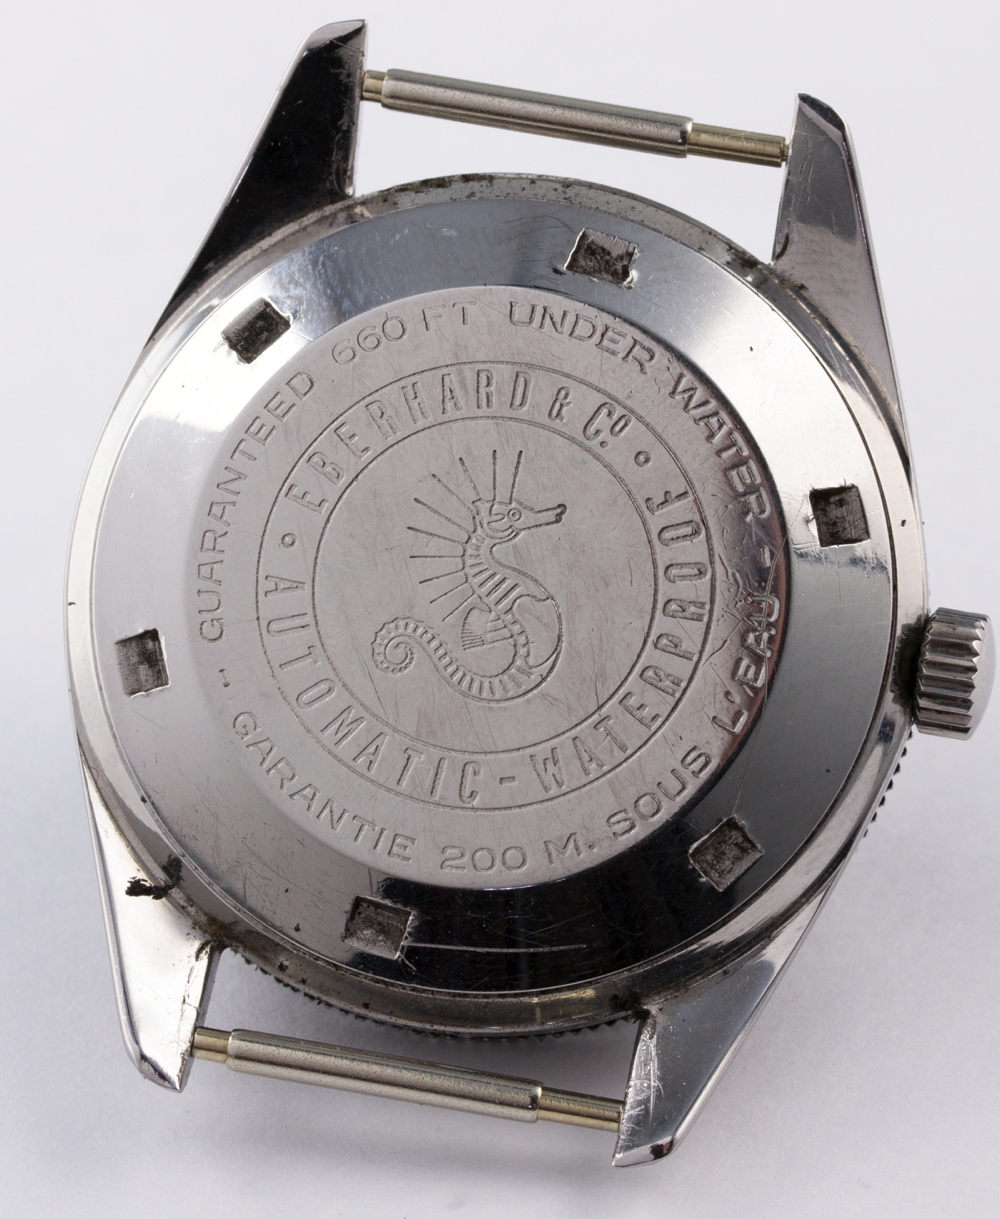 A RARE GENTLEMAN'S STAINLESS STEEL EBERHARD & CO AUTOMATIC DIVERS WRIST WATCH CIRCA 1961, NUMBER 247 - Image 7 of 9